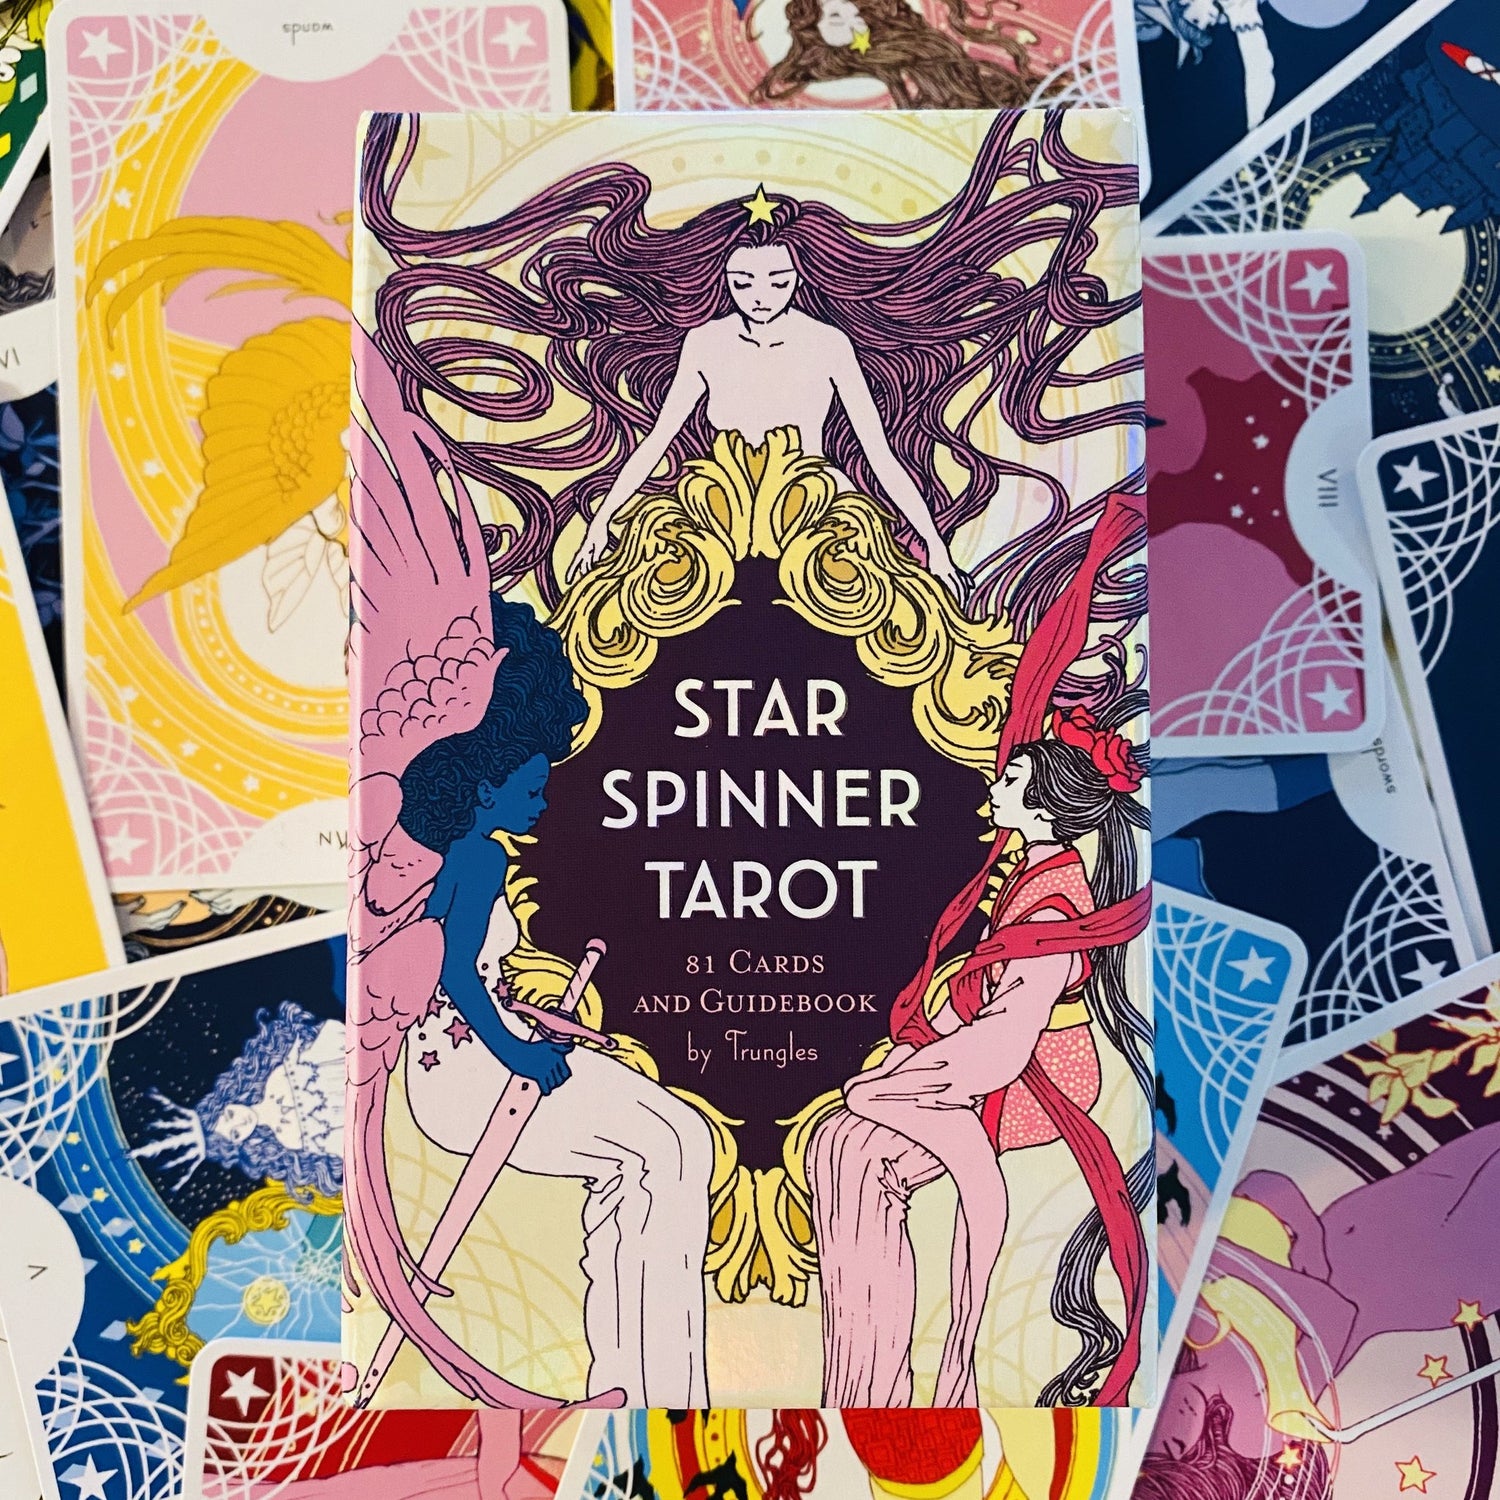 Box cover art of the Star Spinner Tarot with collection of cards.